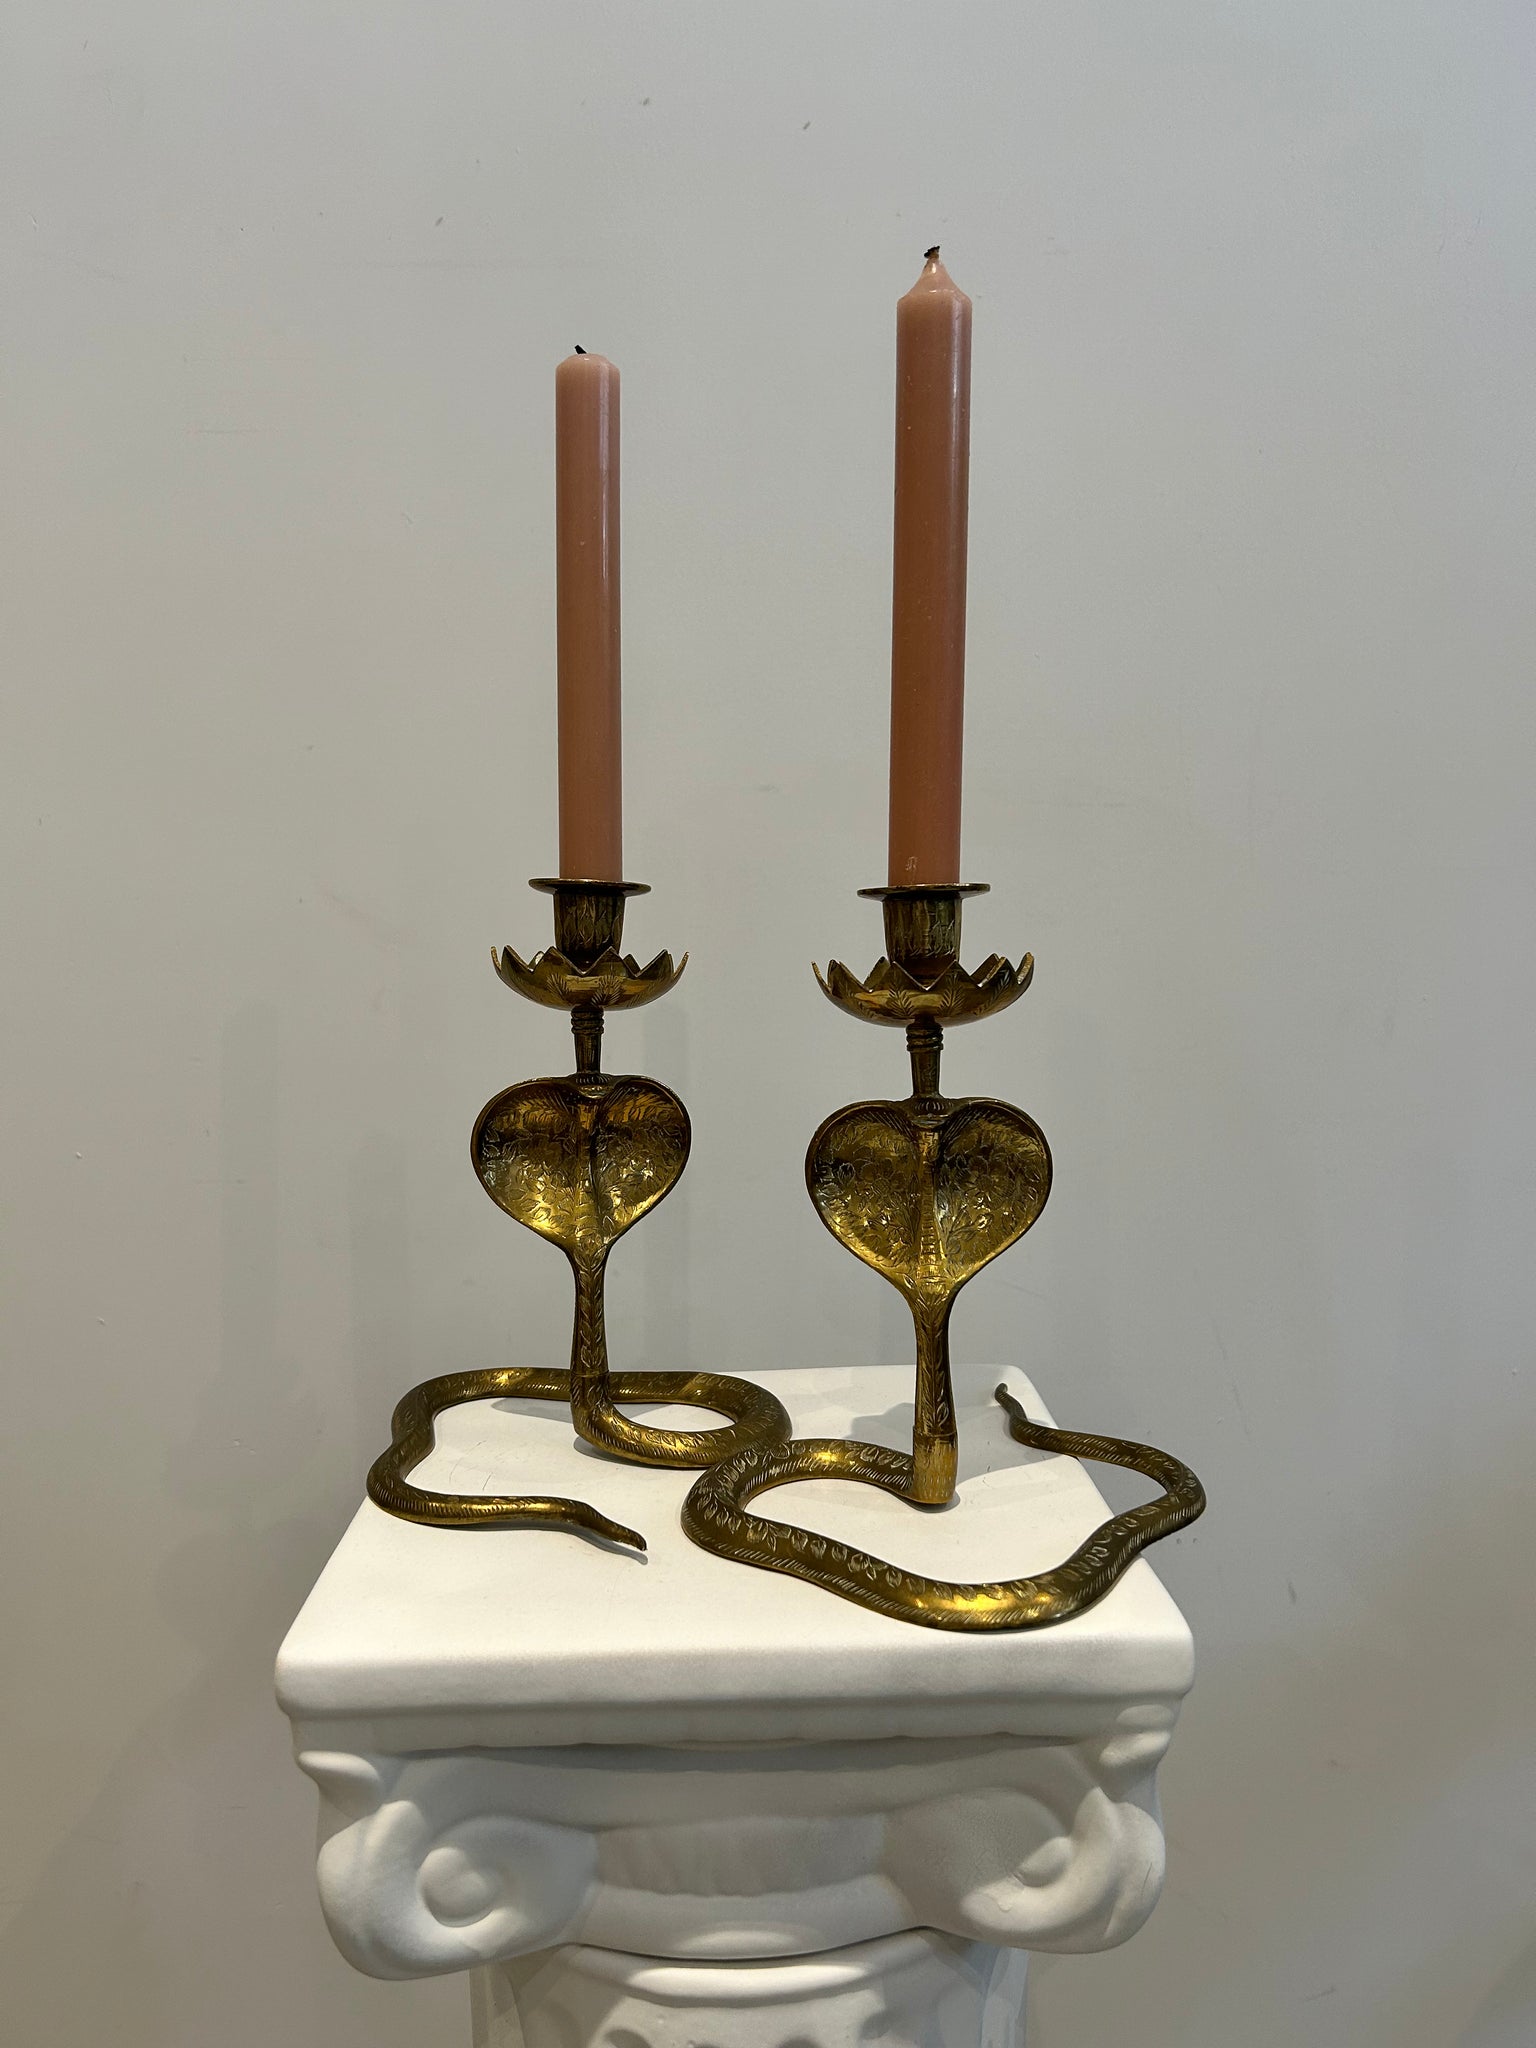 Solid brass cobra candle holders